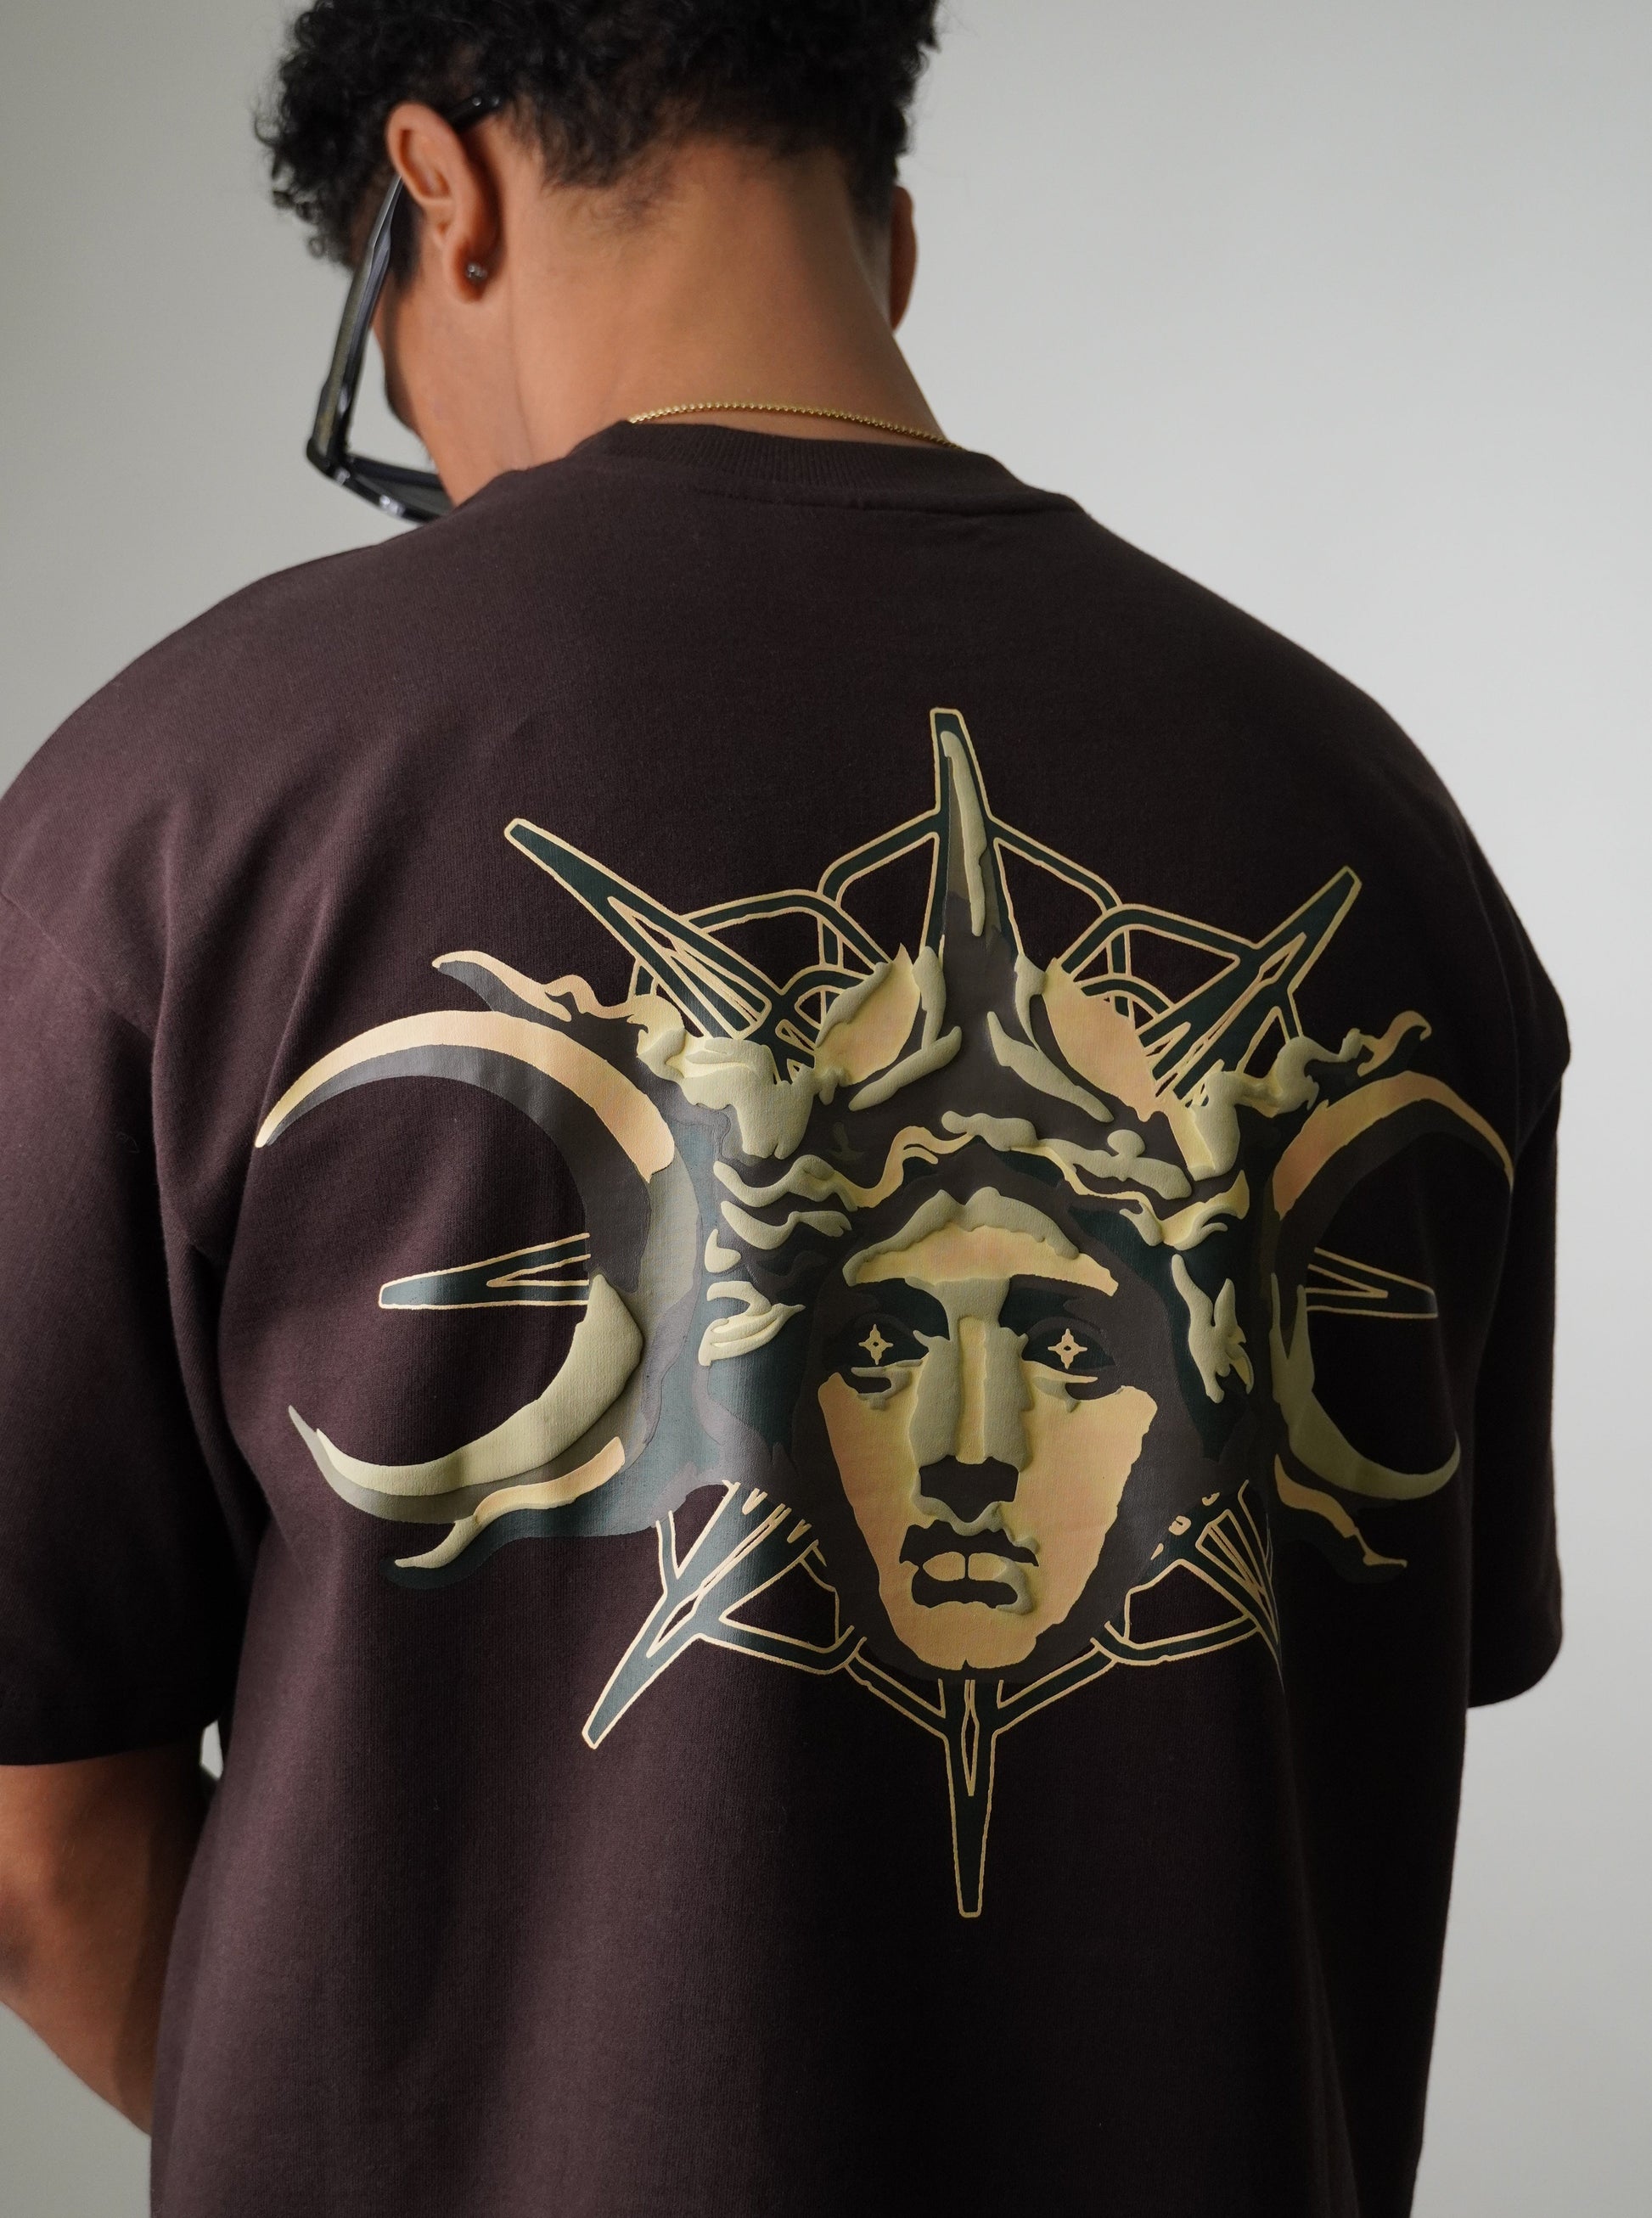 Astral Vision Tee (Oversized Tshirts) by Ripoff